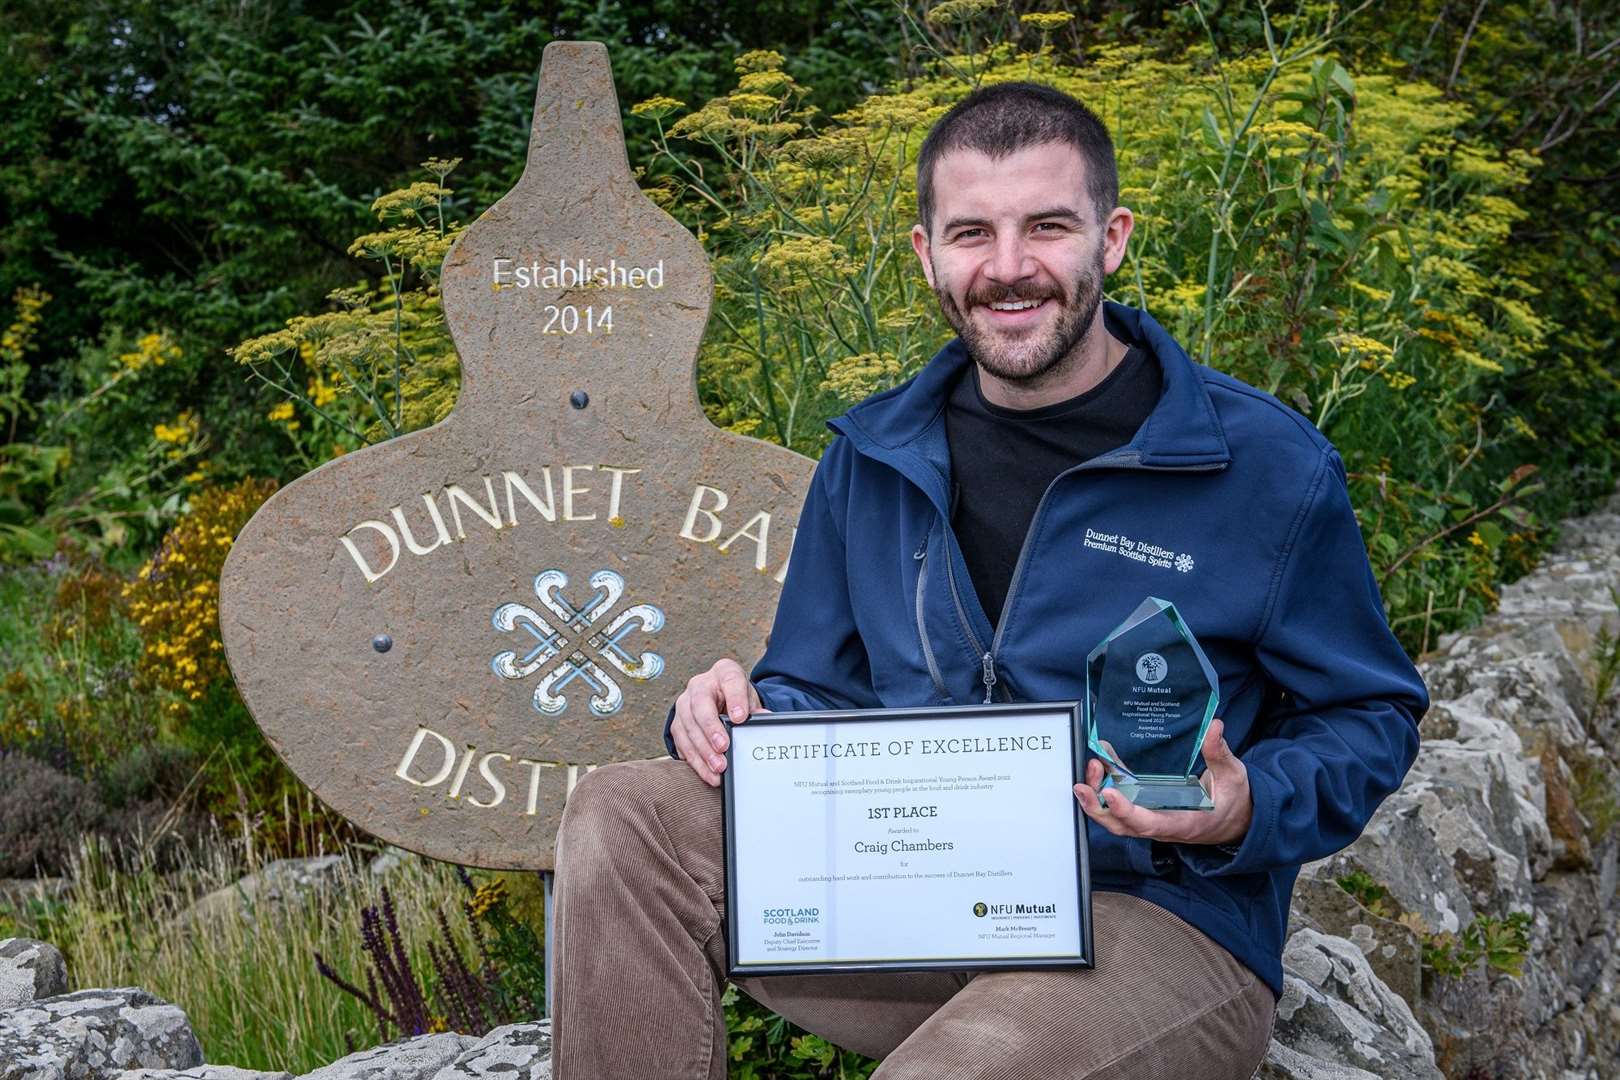 Last year’s winner was 23-year-old Craig Chambers, a Distiller at Dunnet Bay Distillers based in Thurso